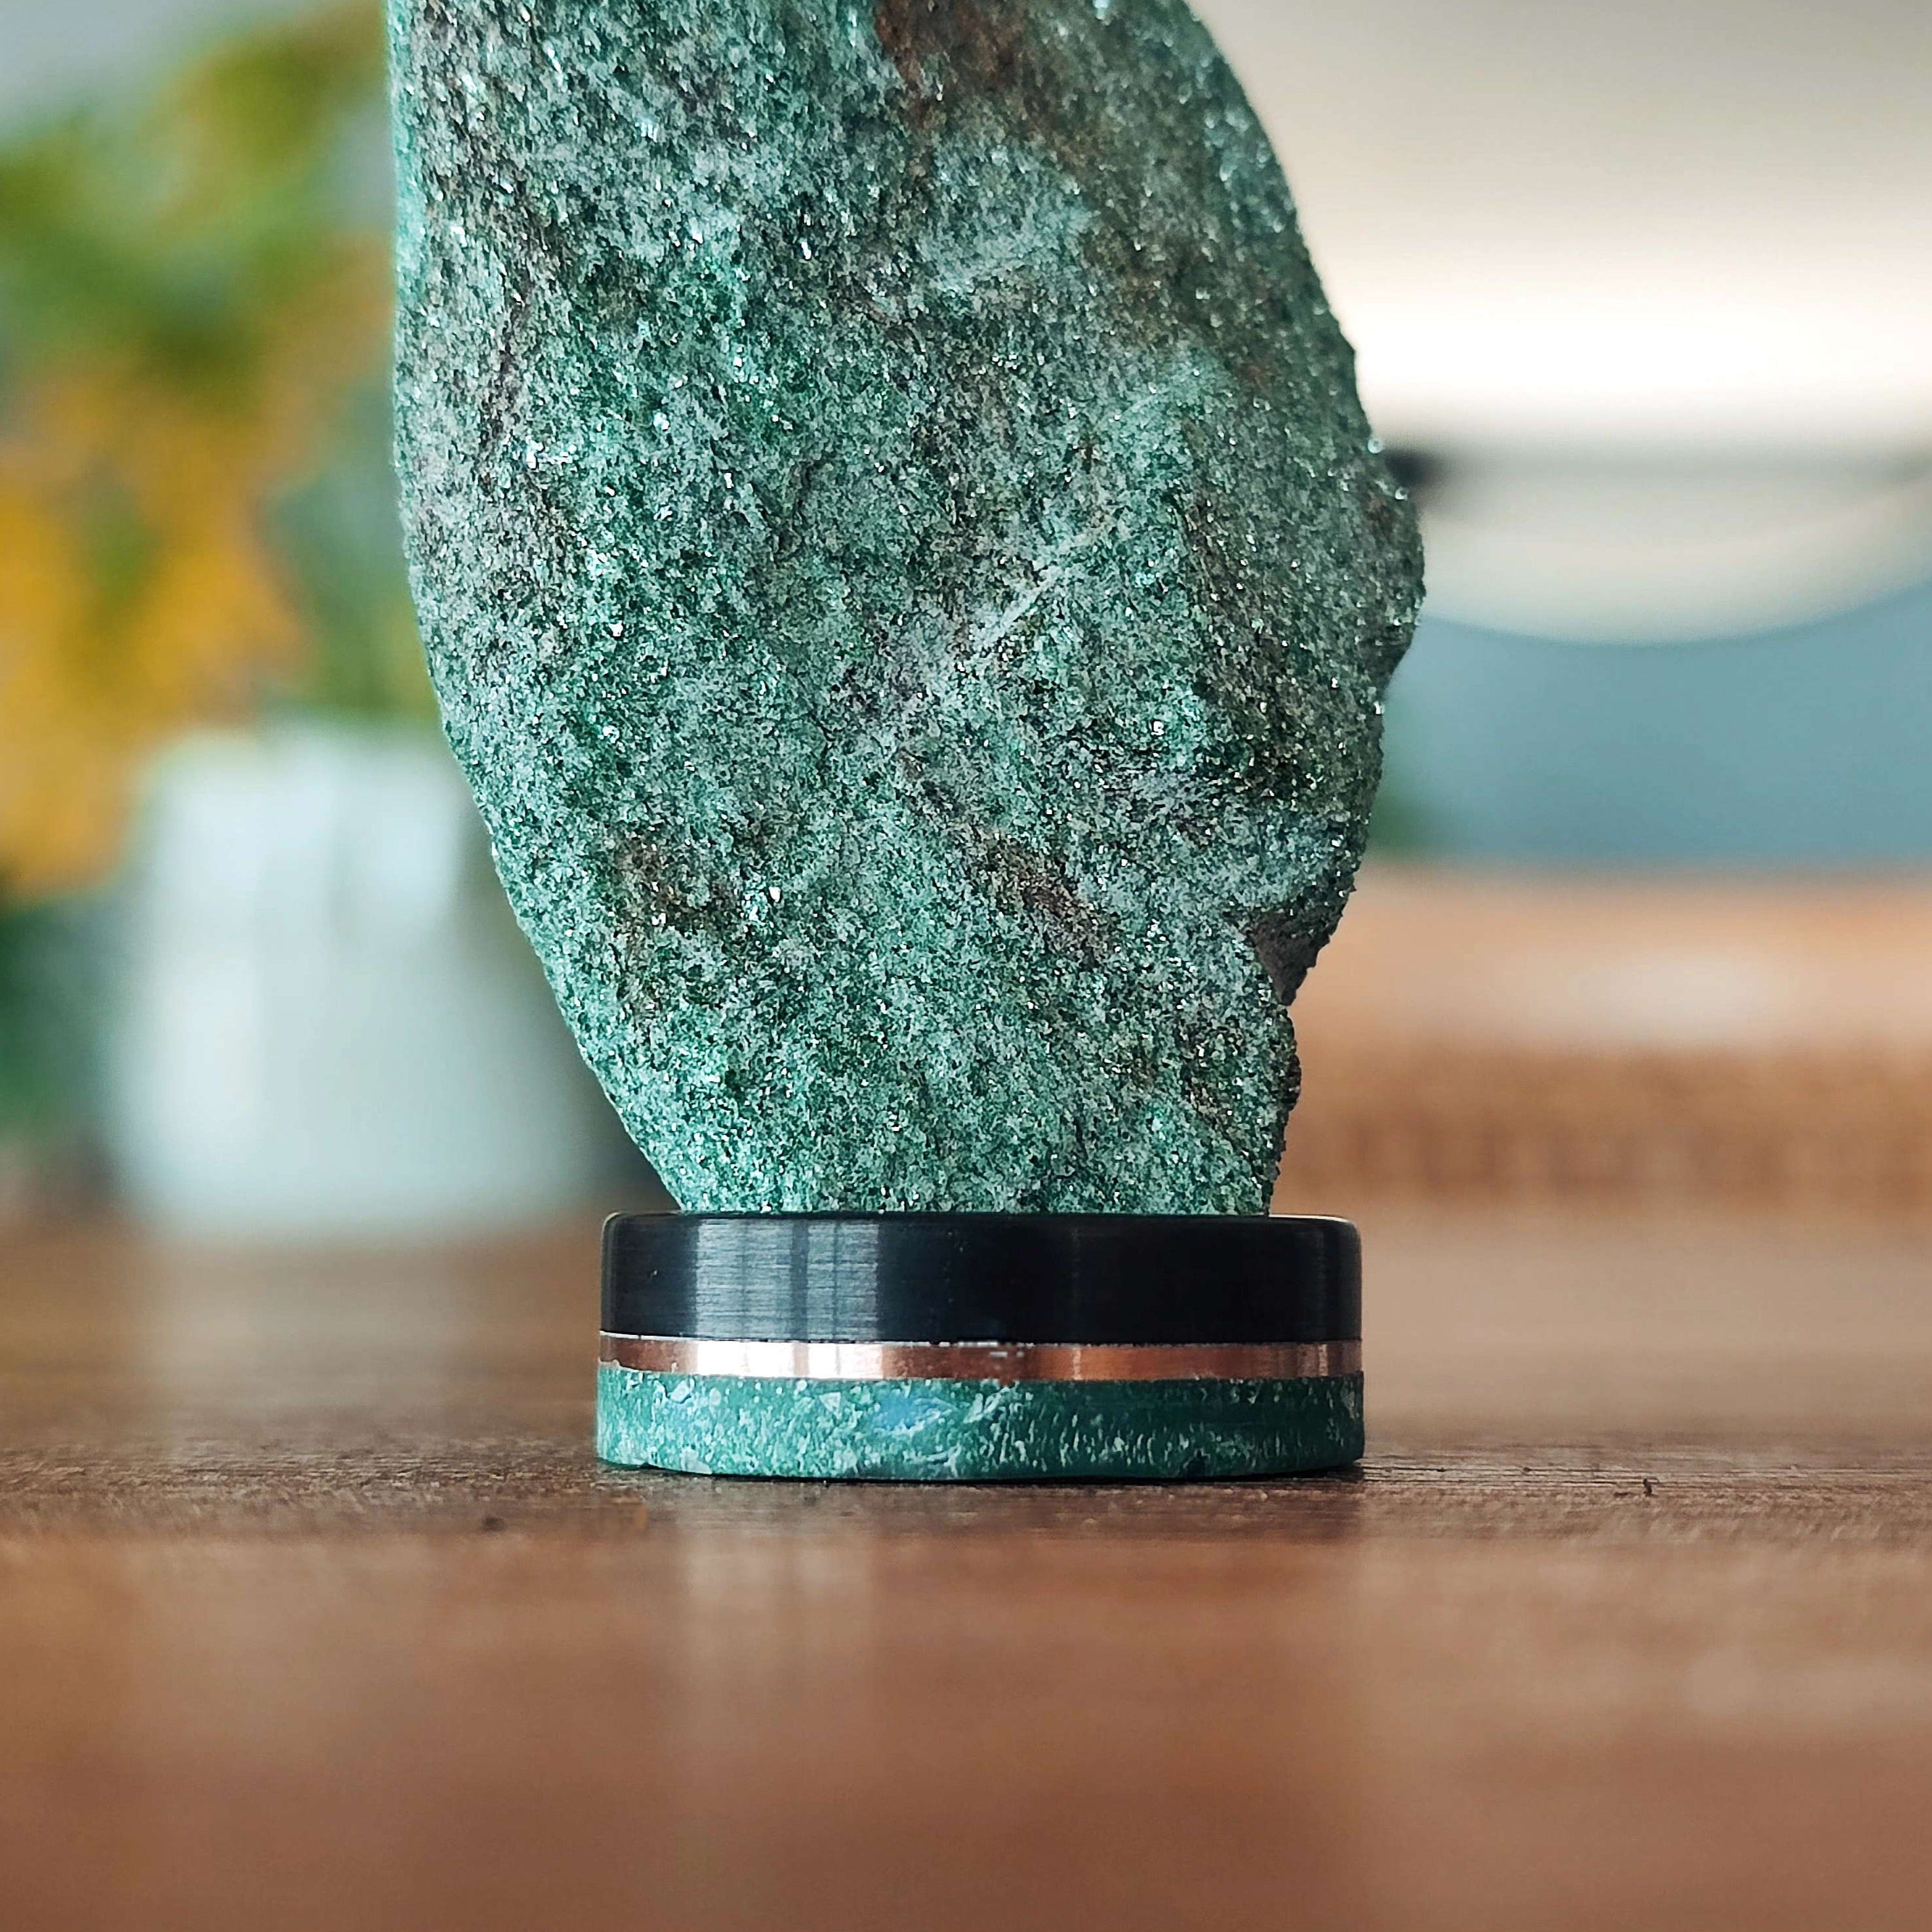 The Marble Green (Limited Edition) - Only 10 rings will be made in this design